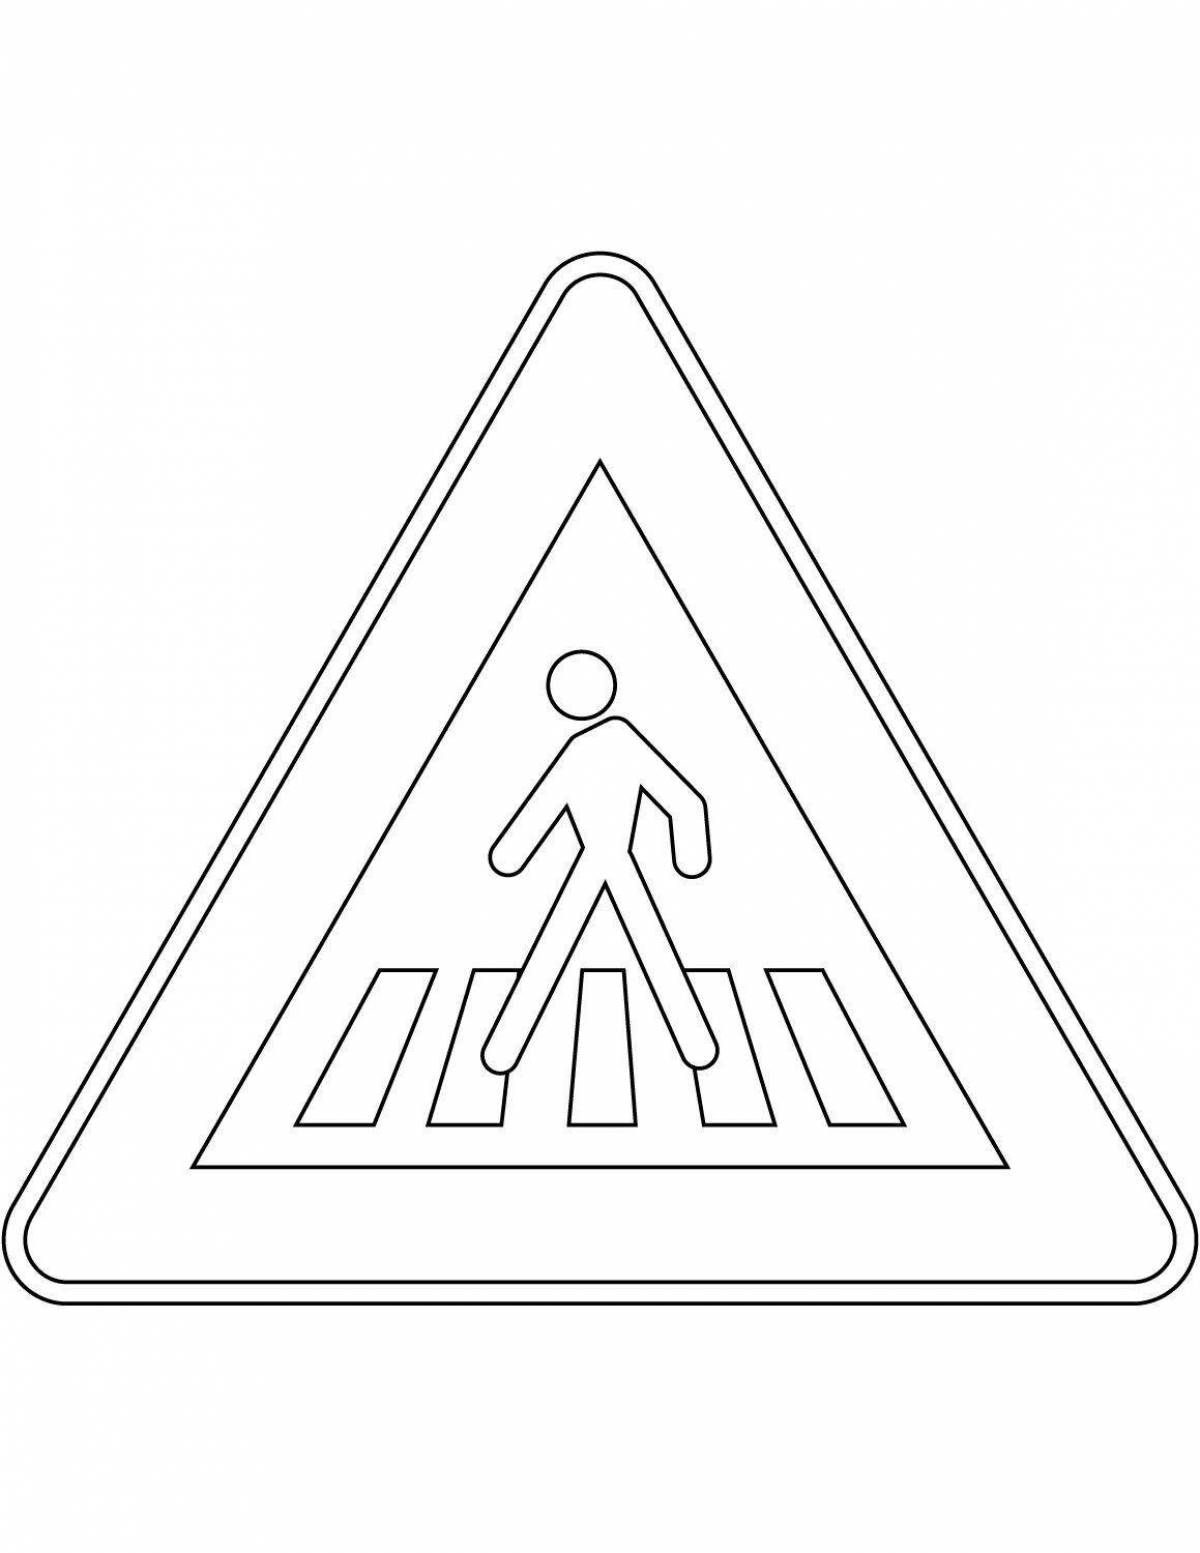 Coloring page mysterious crosswalk road sign